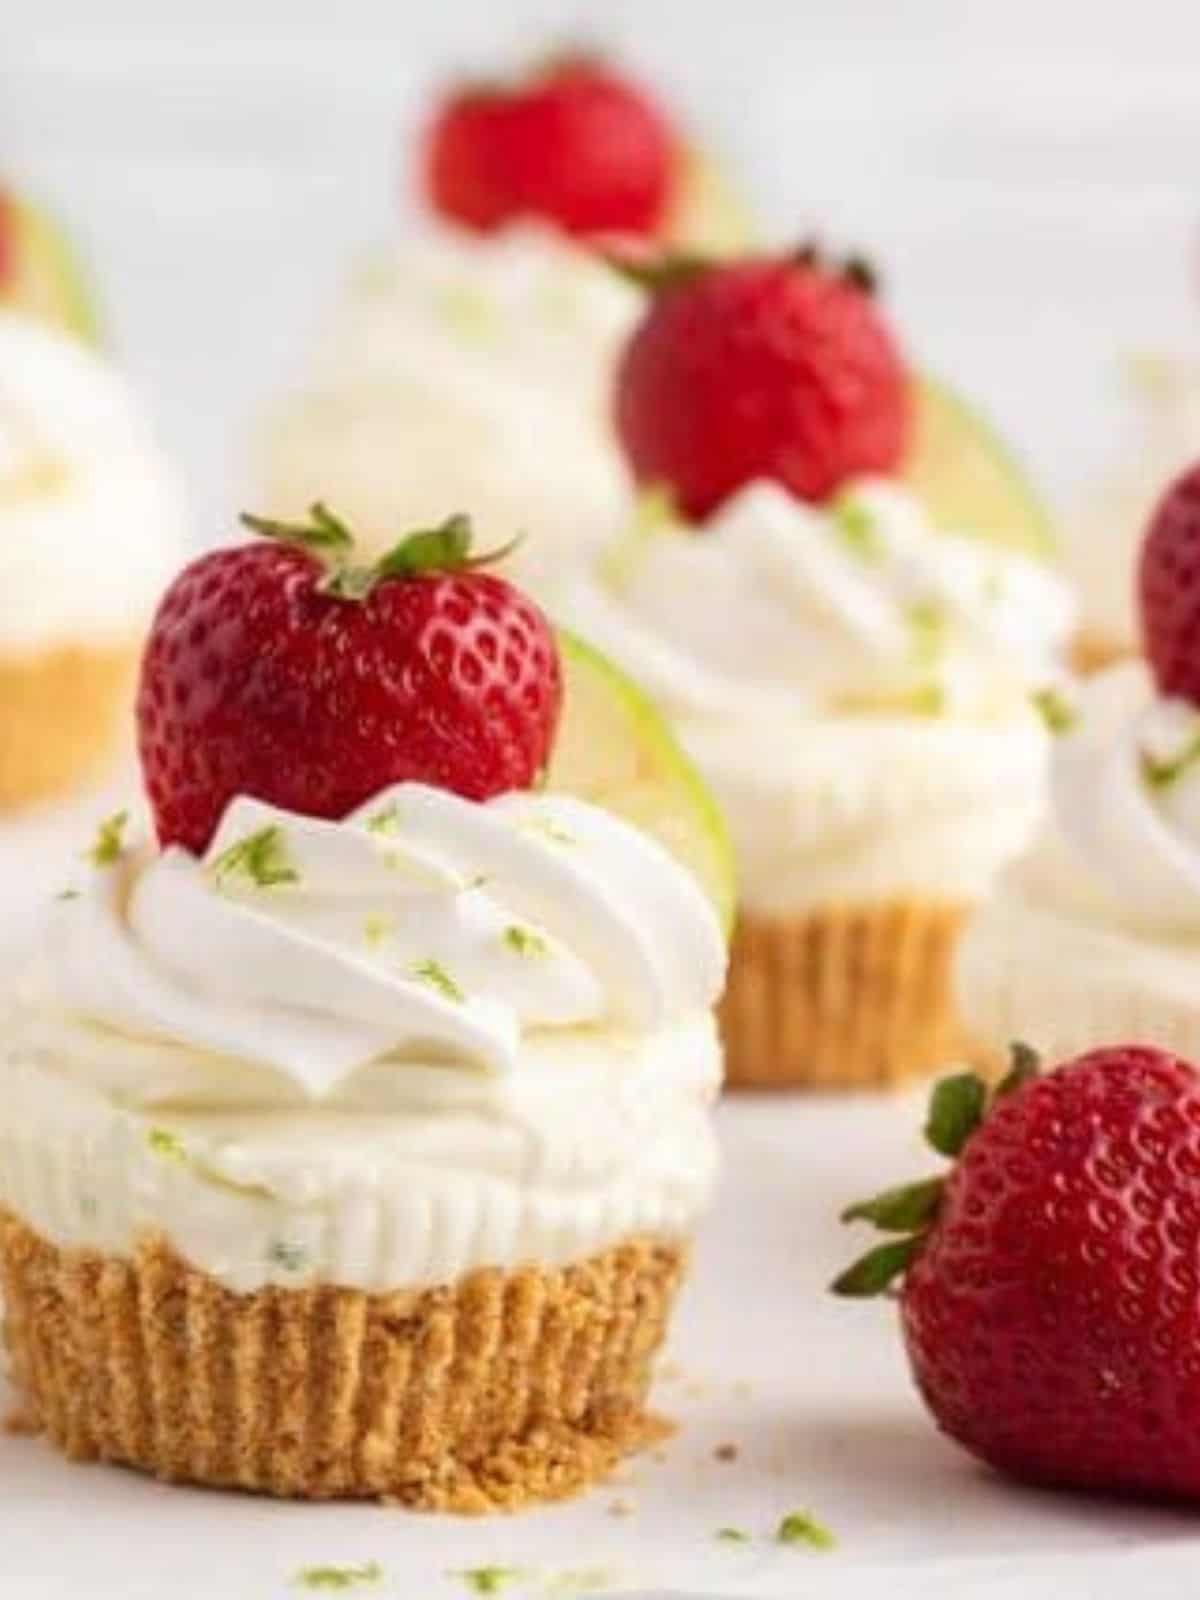 No-Bake Strawberry Lime Cheesecake topped with whole strawberries.